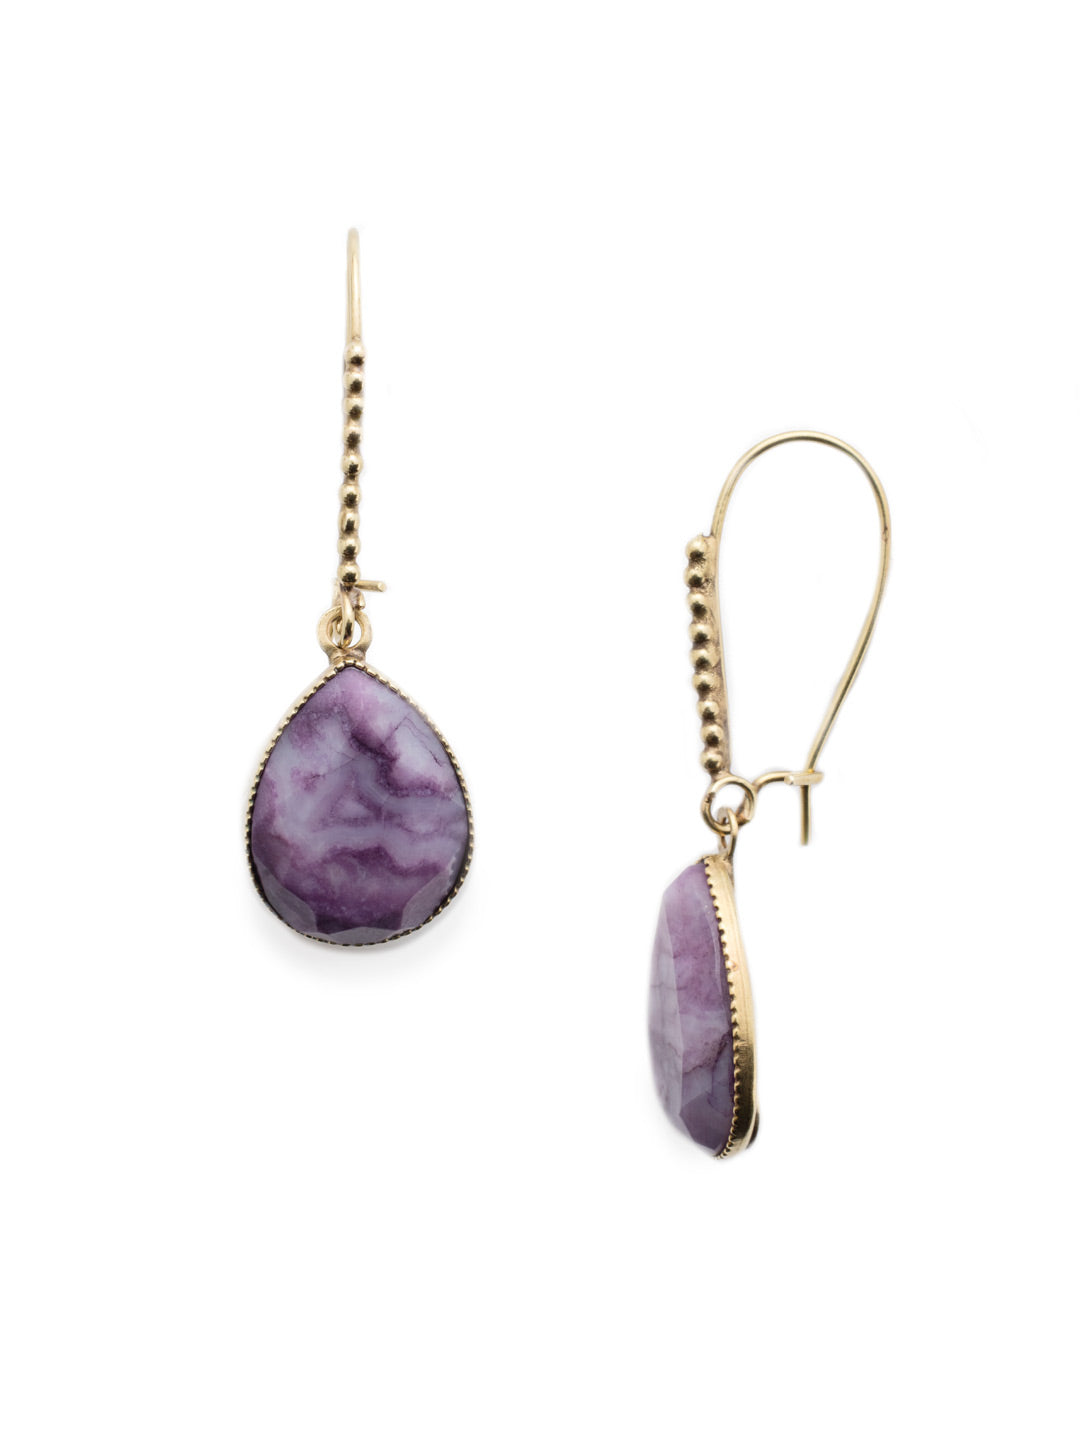 Arizona Dangle Earrings - EEU13AGDCS - If you love an earthy feel to your jewelry, grab our Arizona Dangle Earrings featuring rich, pear-shaped mineral stones. From Sorrelli's Duchess collection in our Antique Gold-tone finish.